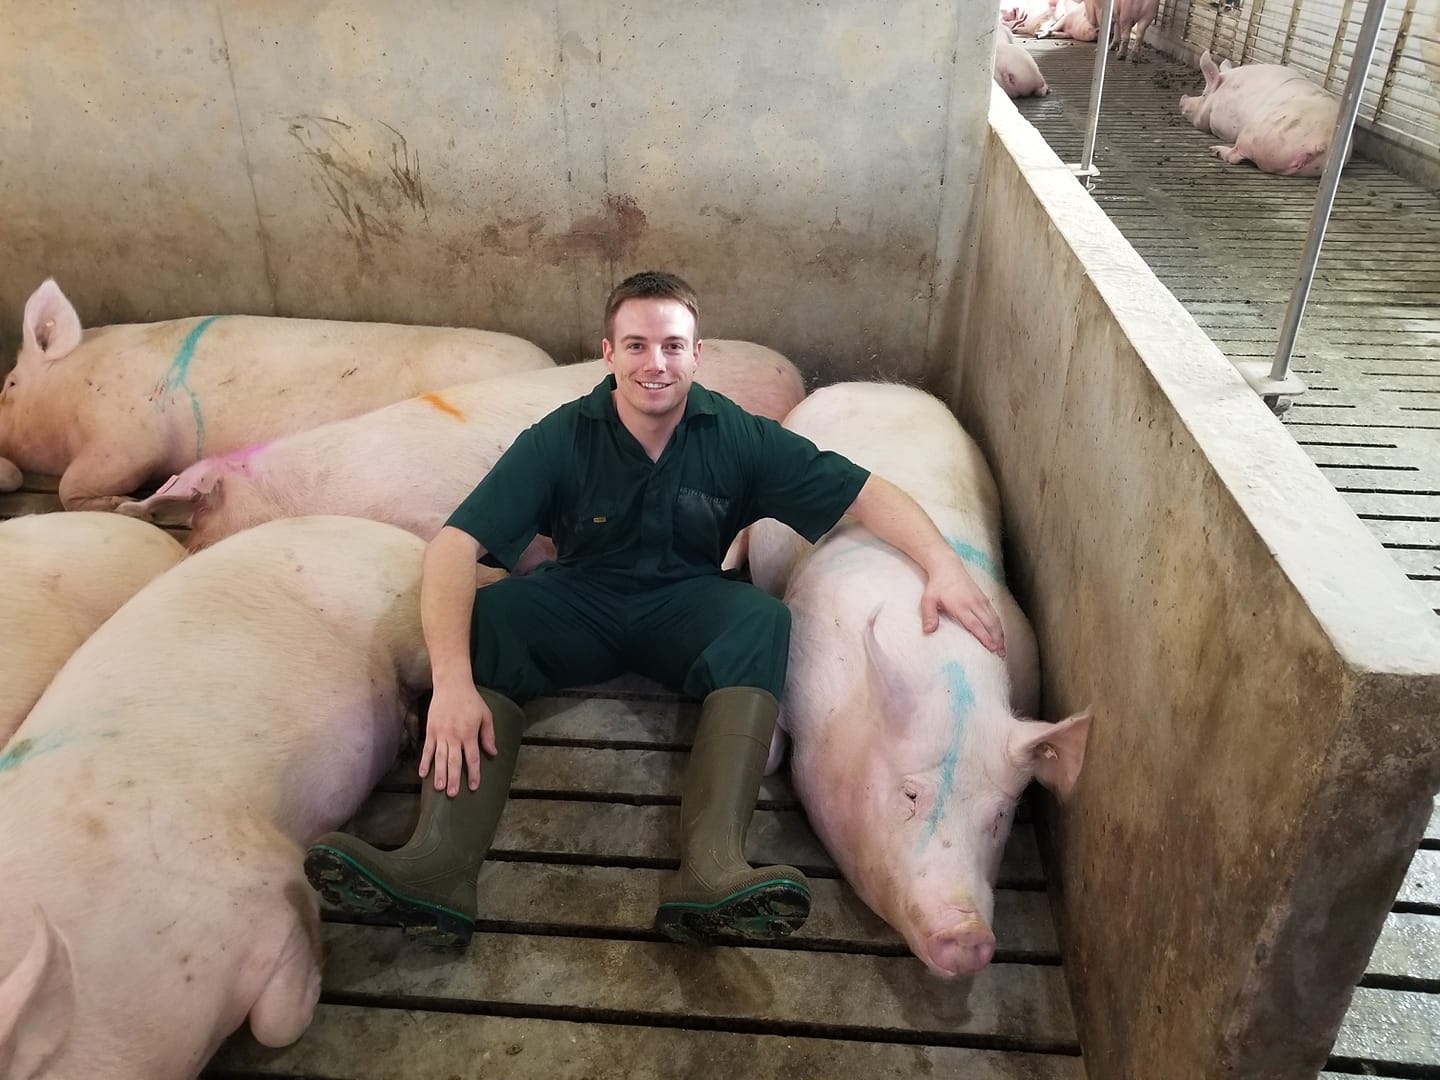 Moving forward, Rooda knew that he could apply his experience and knowledge gained so far to design an innovative product to the pig industry that would benefit both pigs and producers